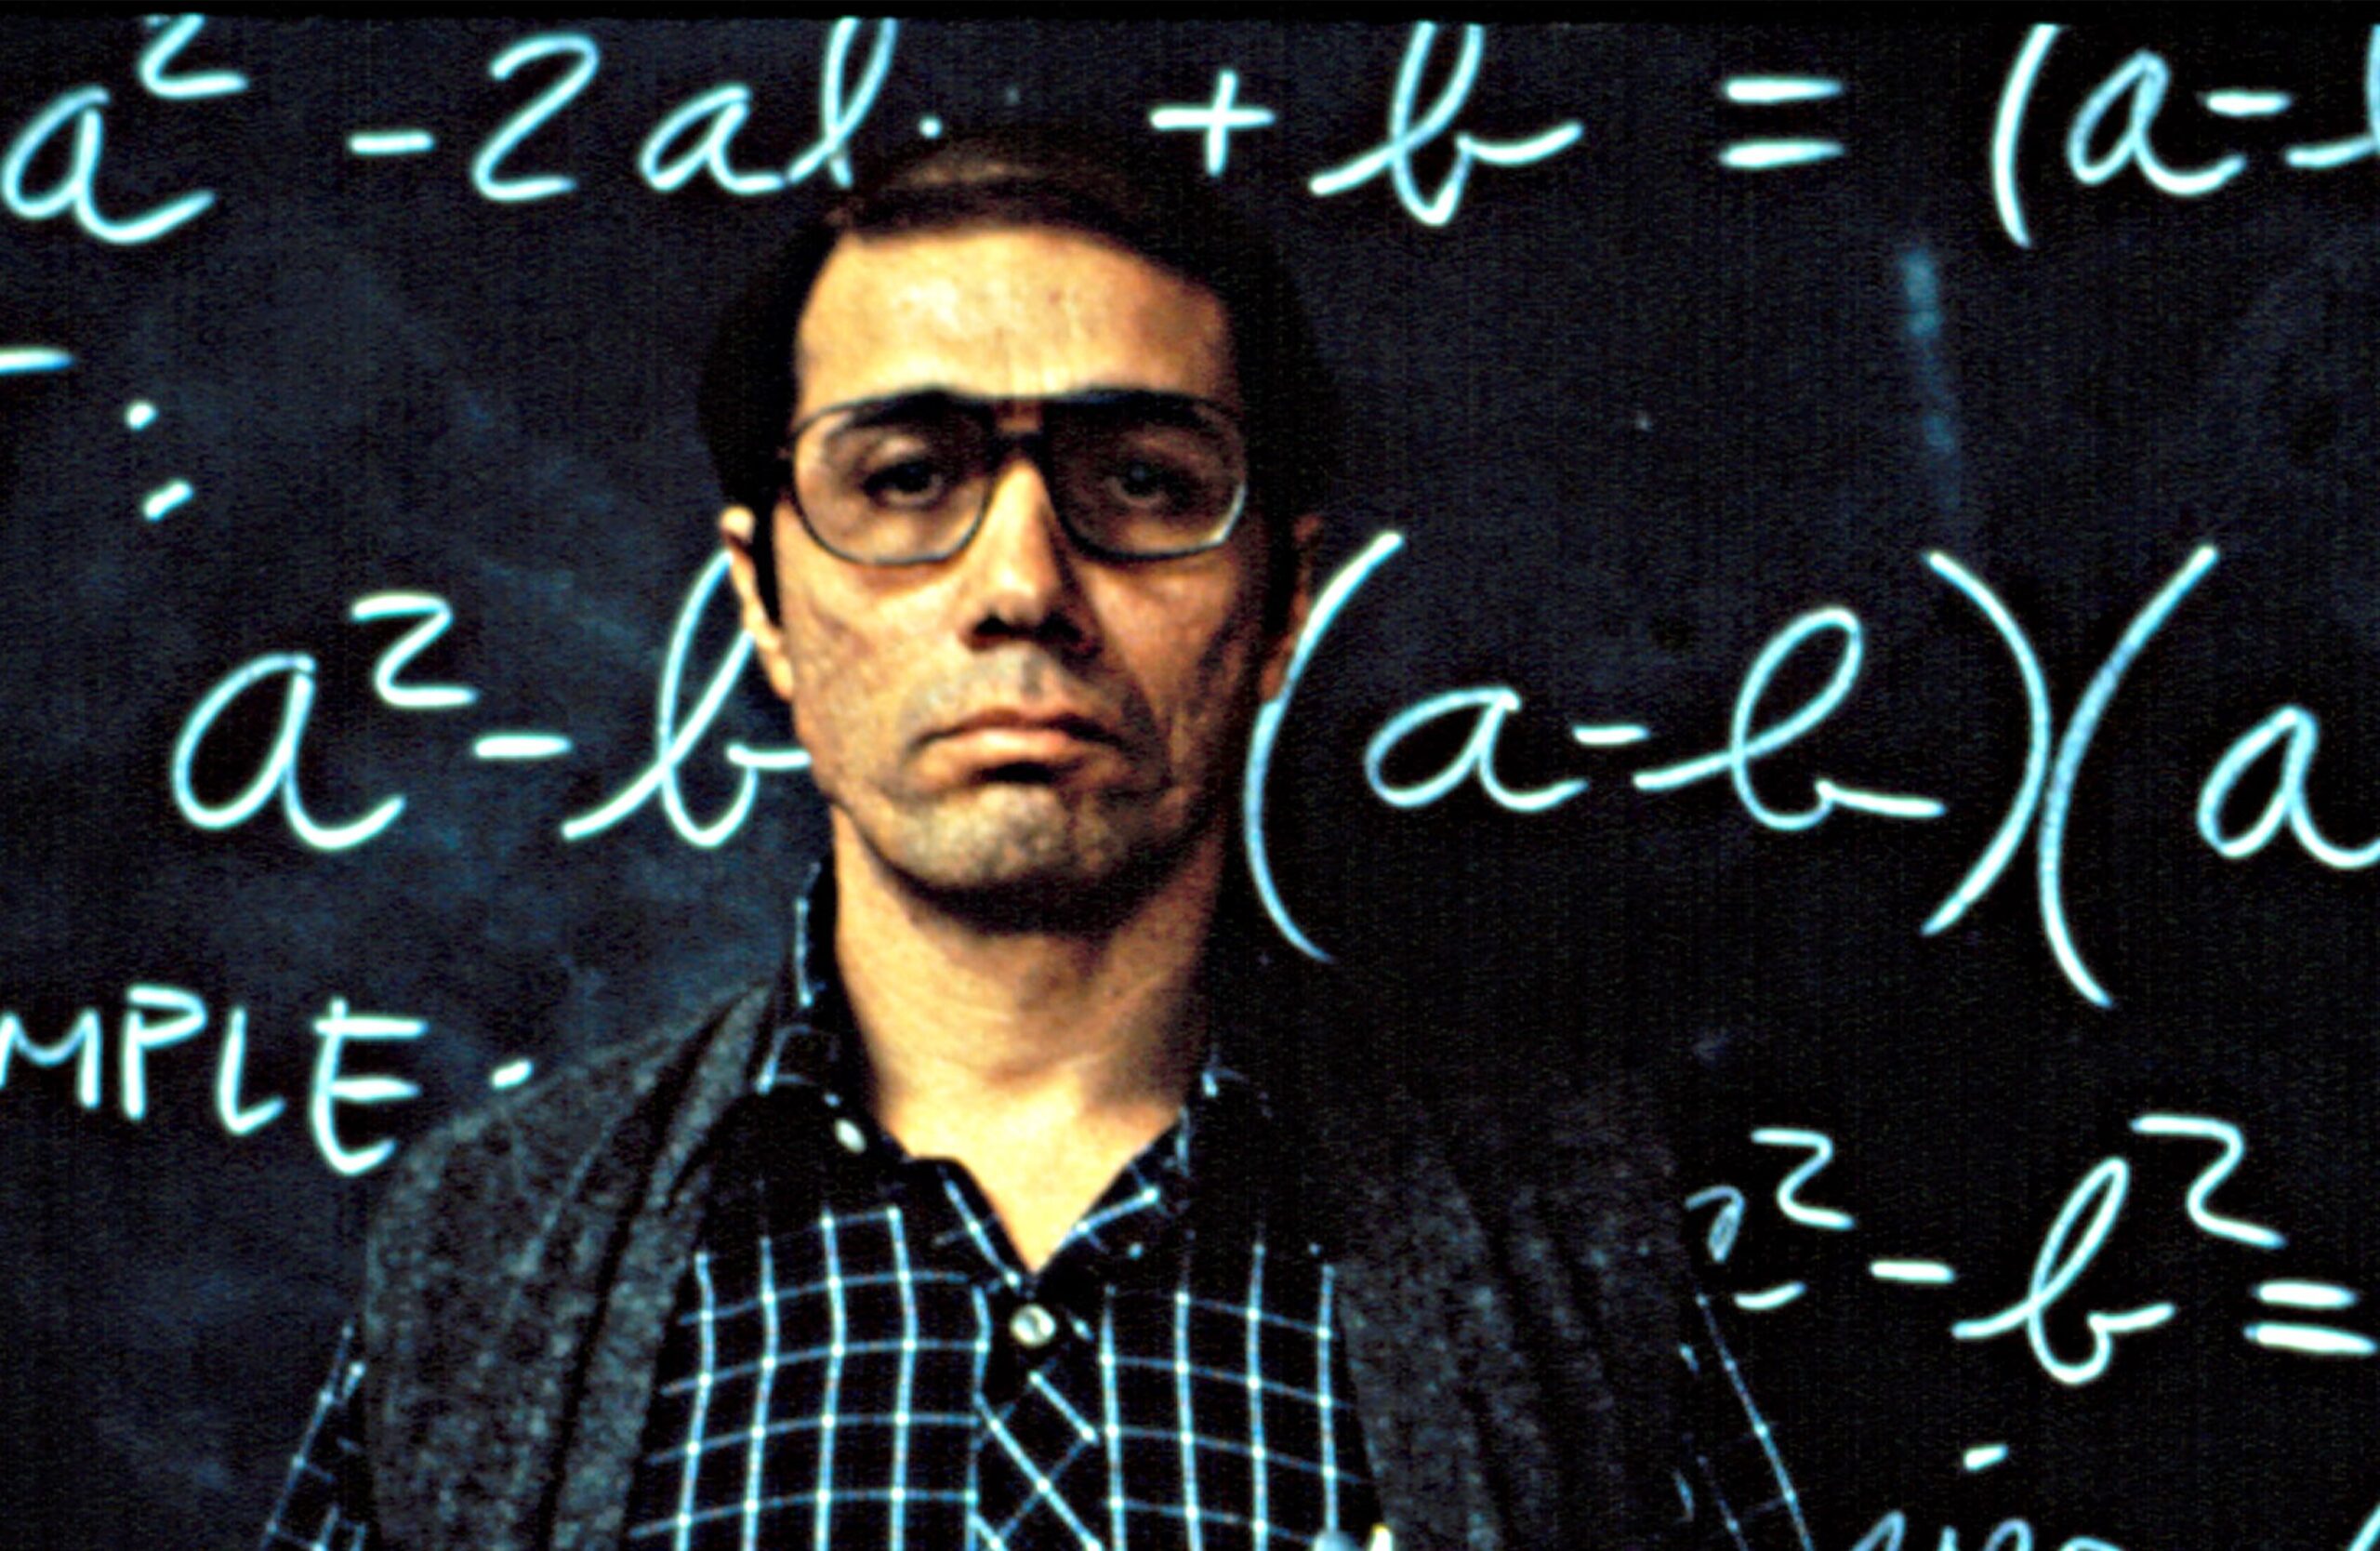 Edward James Olmos is Jaime Escalante in Stand and Deliver